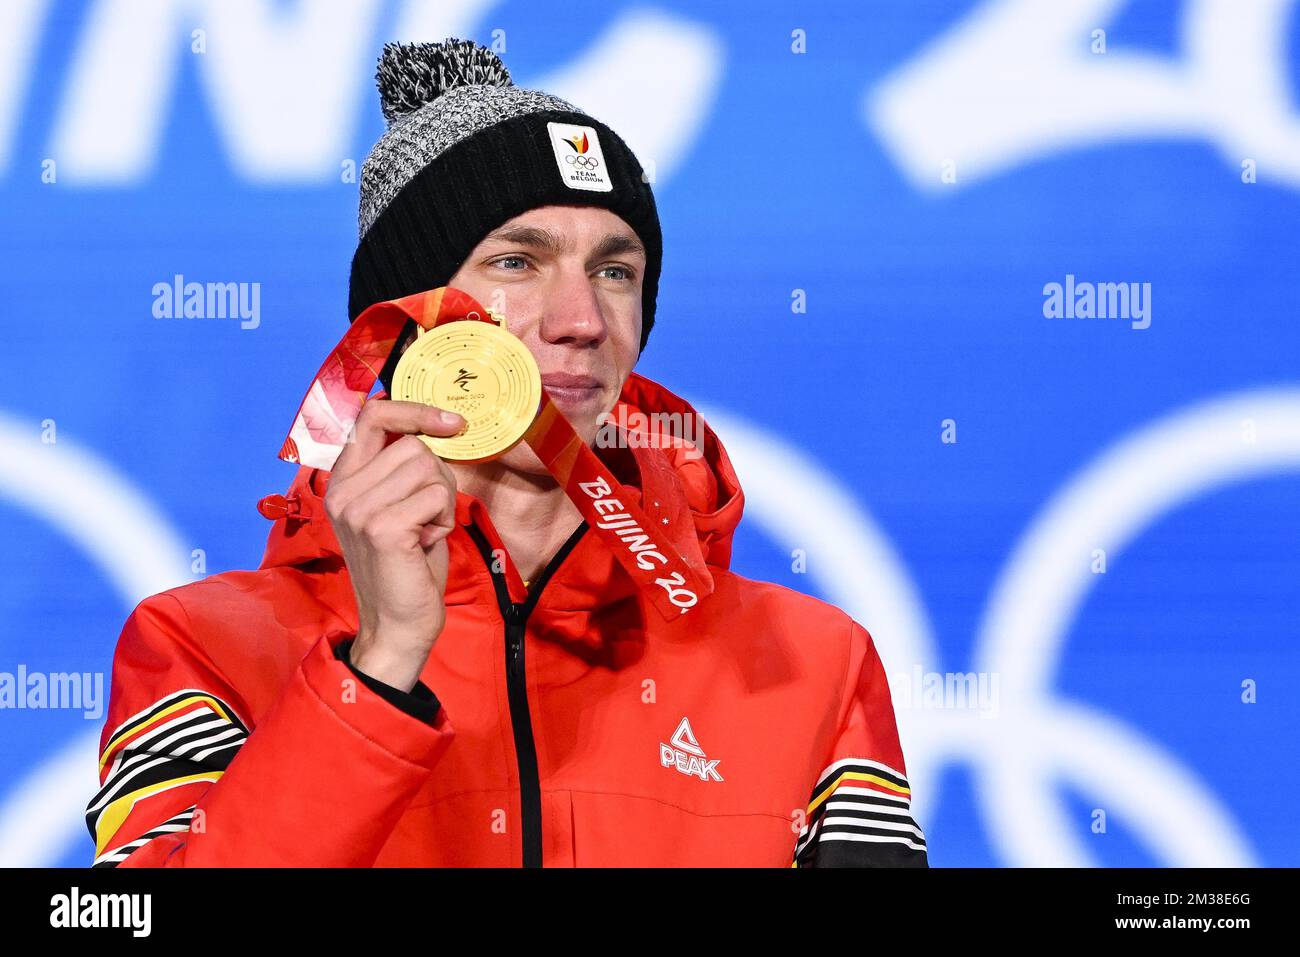 Belgian speed skater Bart Swings, winner of the gold medal celebrates on the podium during the medal ceremony of the men's mass start speed skating event at the Beijing 2022 Winter Olympics in Beijing, China, Saturday 19 February 2022. Bart Swings won the gold medal. The winter Olympics are taking place from 4 February to 20 February 2022. BELGA PHOTO LAURIE DIEFFEMBACQ Stock Photo